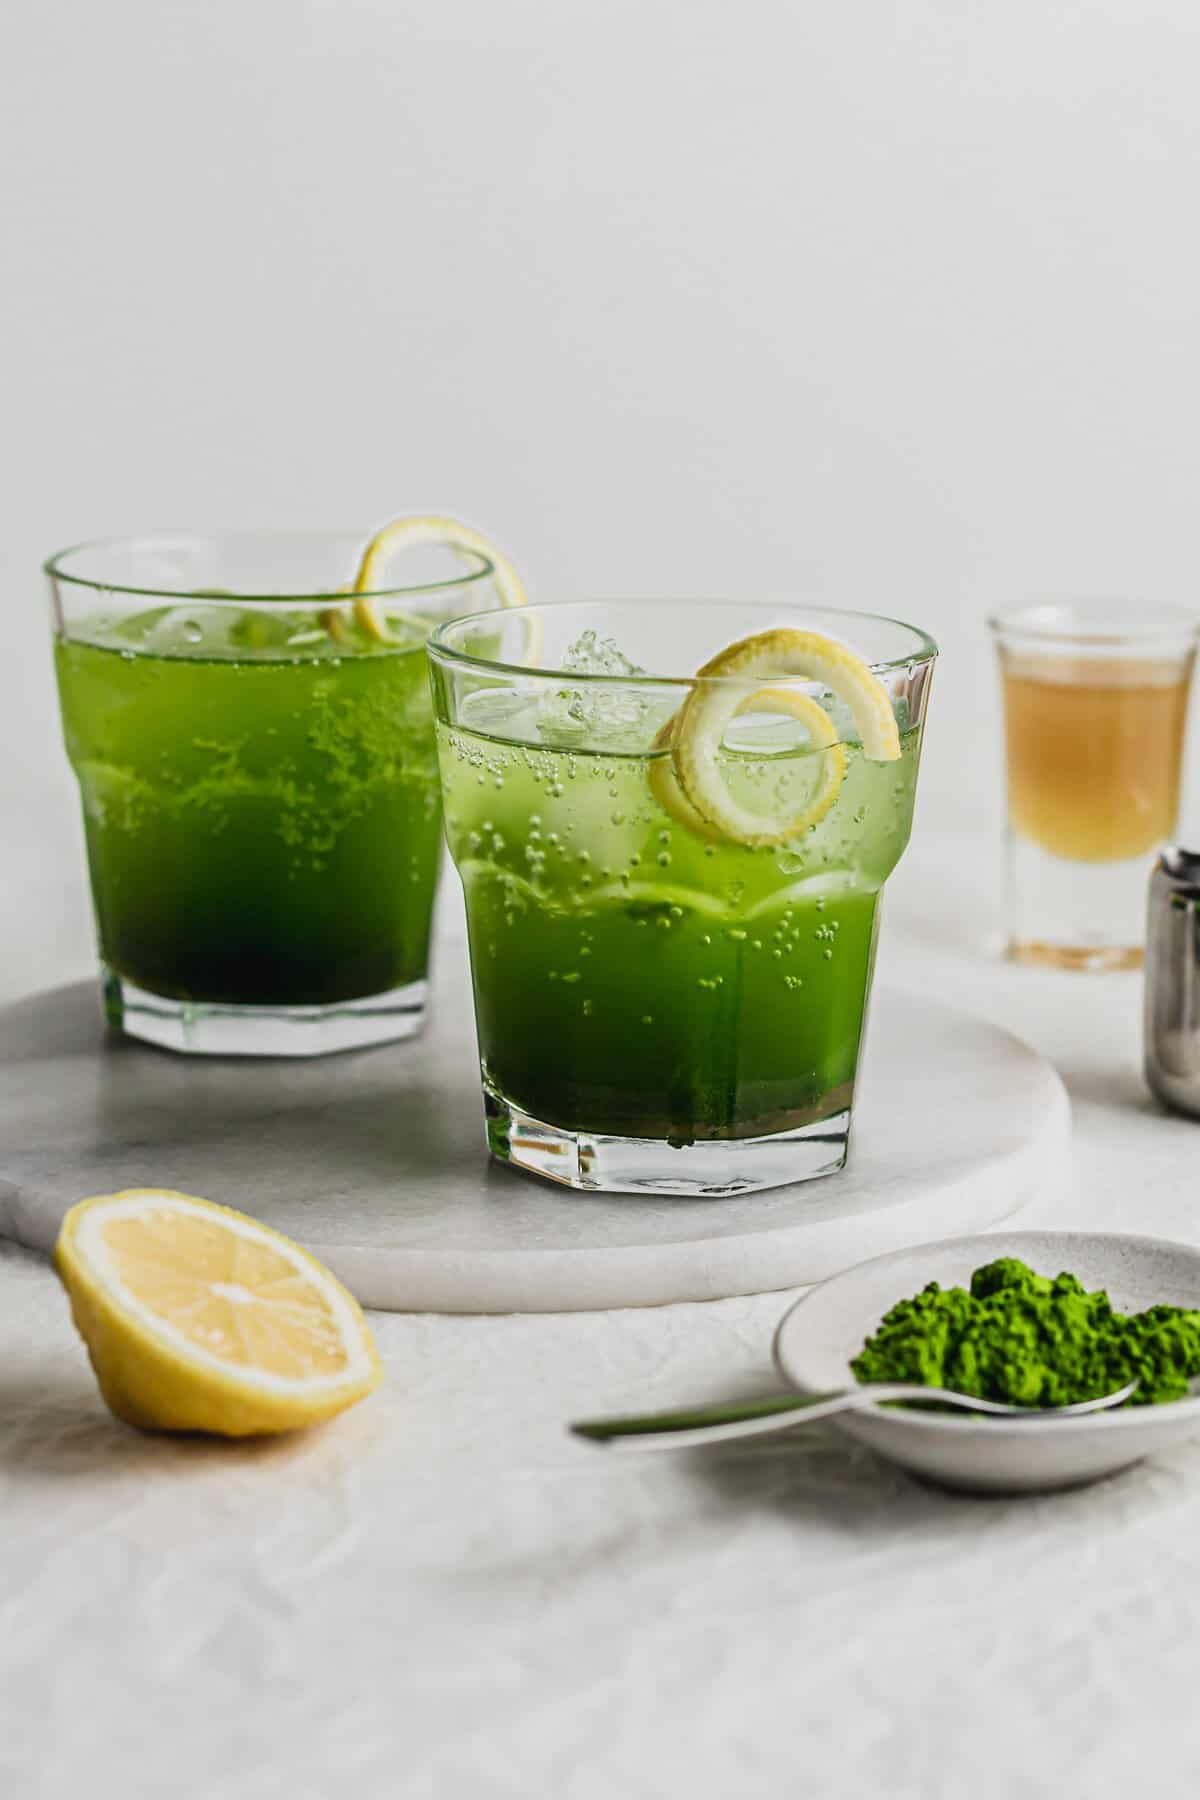 Sipping outside the box: 11 unique drinks using matcha tea powder - cover